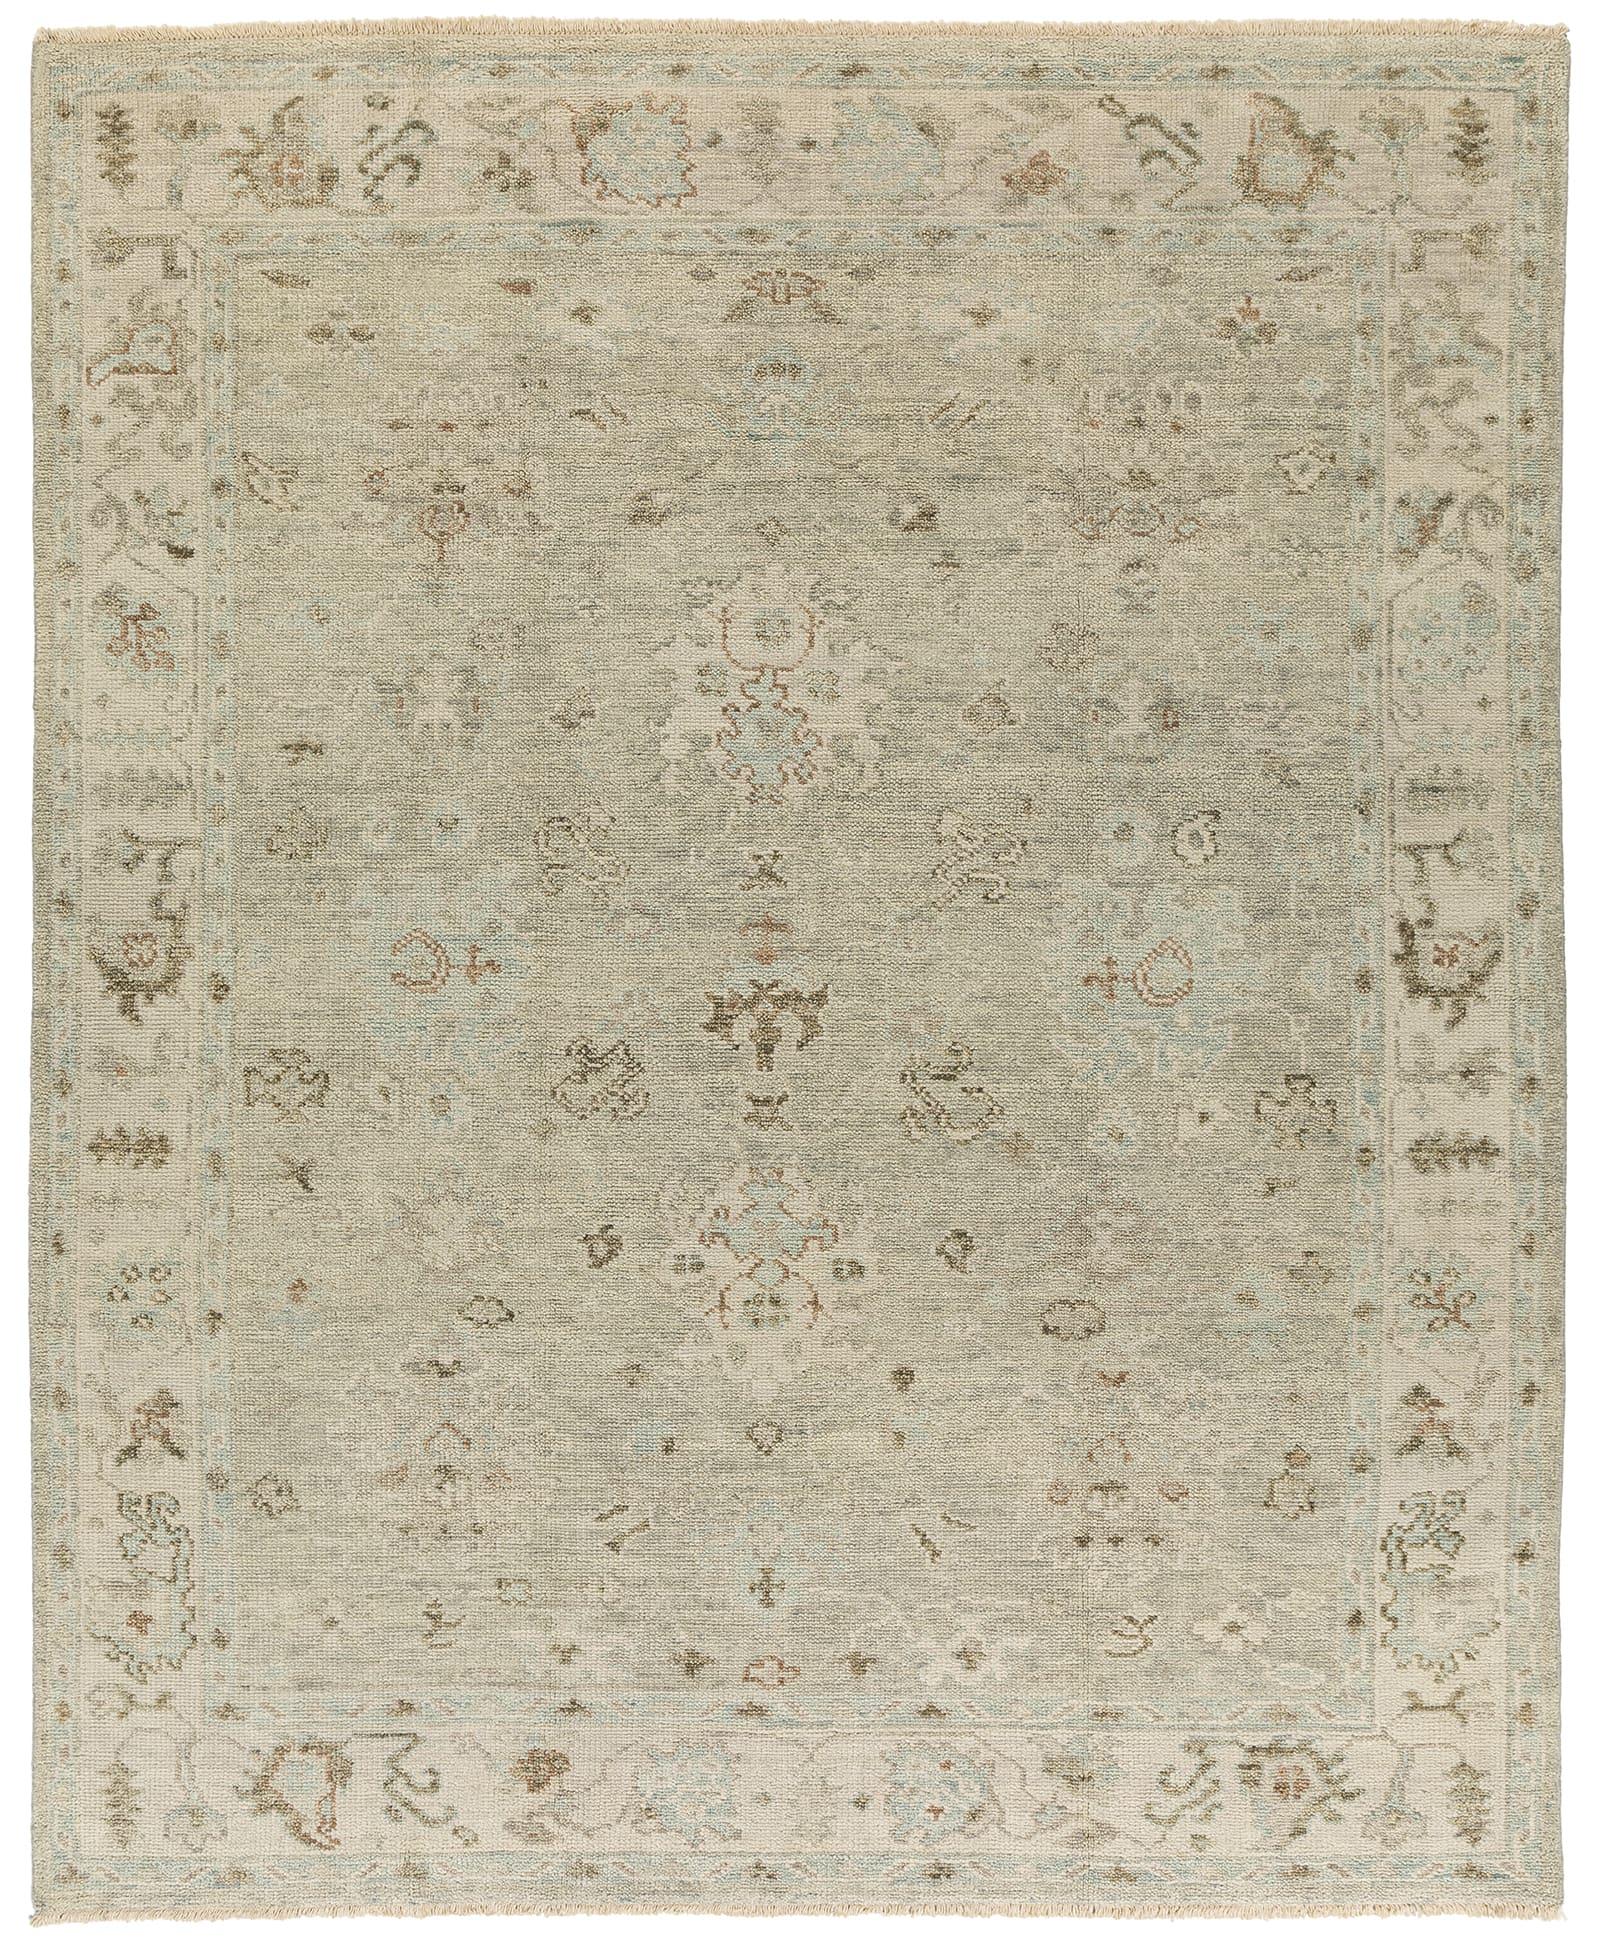 Indian Briana Bone 8x10, Bordered Rugs, Traditional, Vintage, Beiges, Greys, Neutrals For Sale